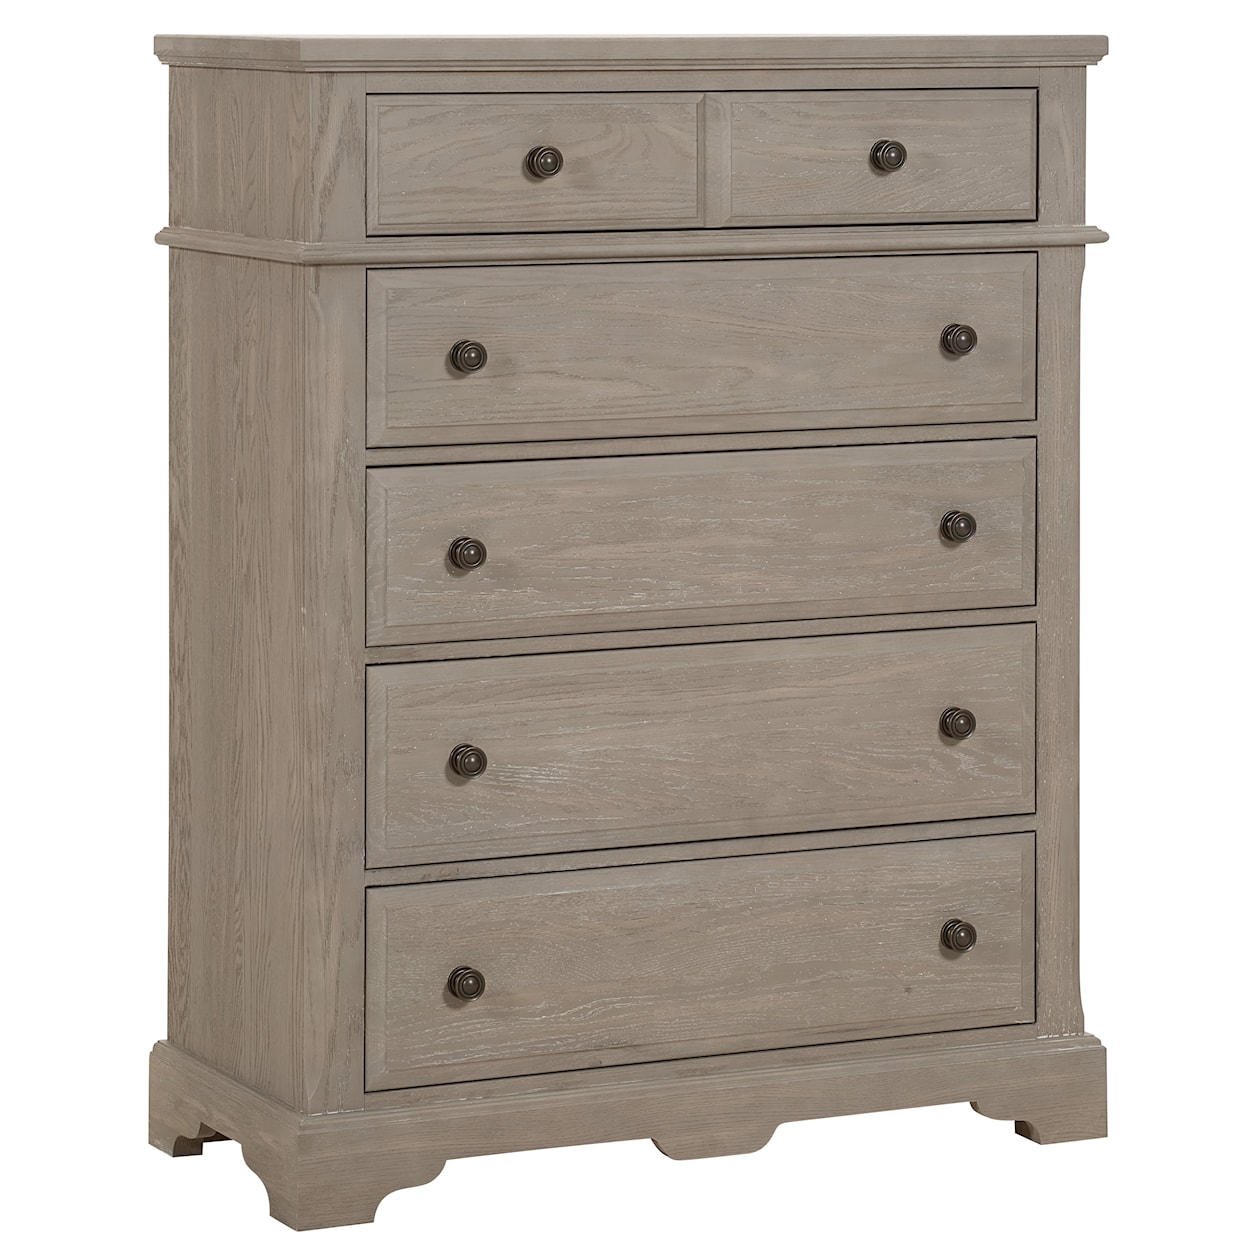 Artisan & Post Heritage Chest of Drawers